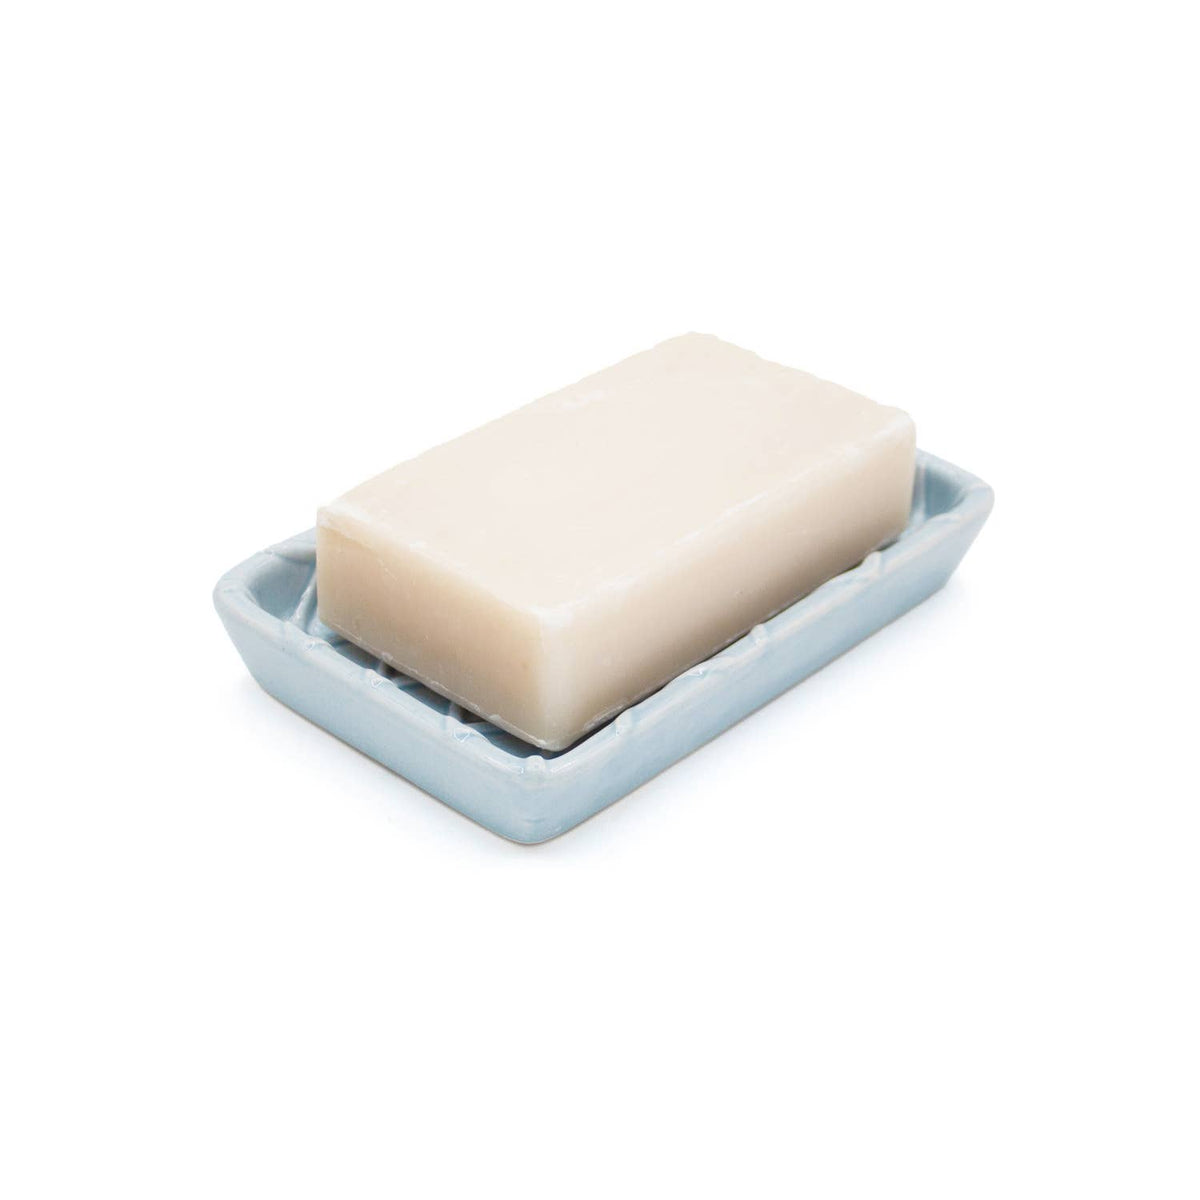 Light Blue Textured Soap Dish - The Preppy Bunny